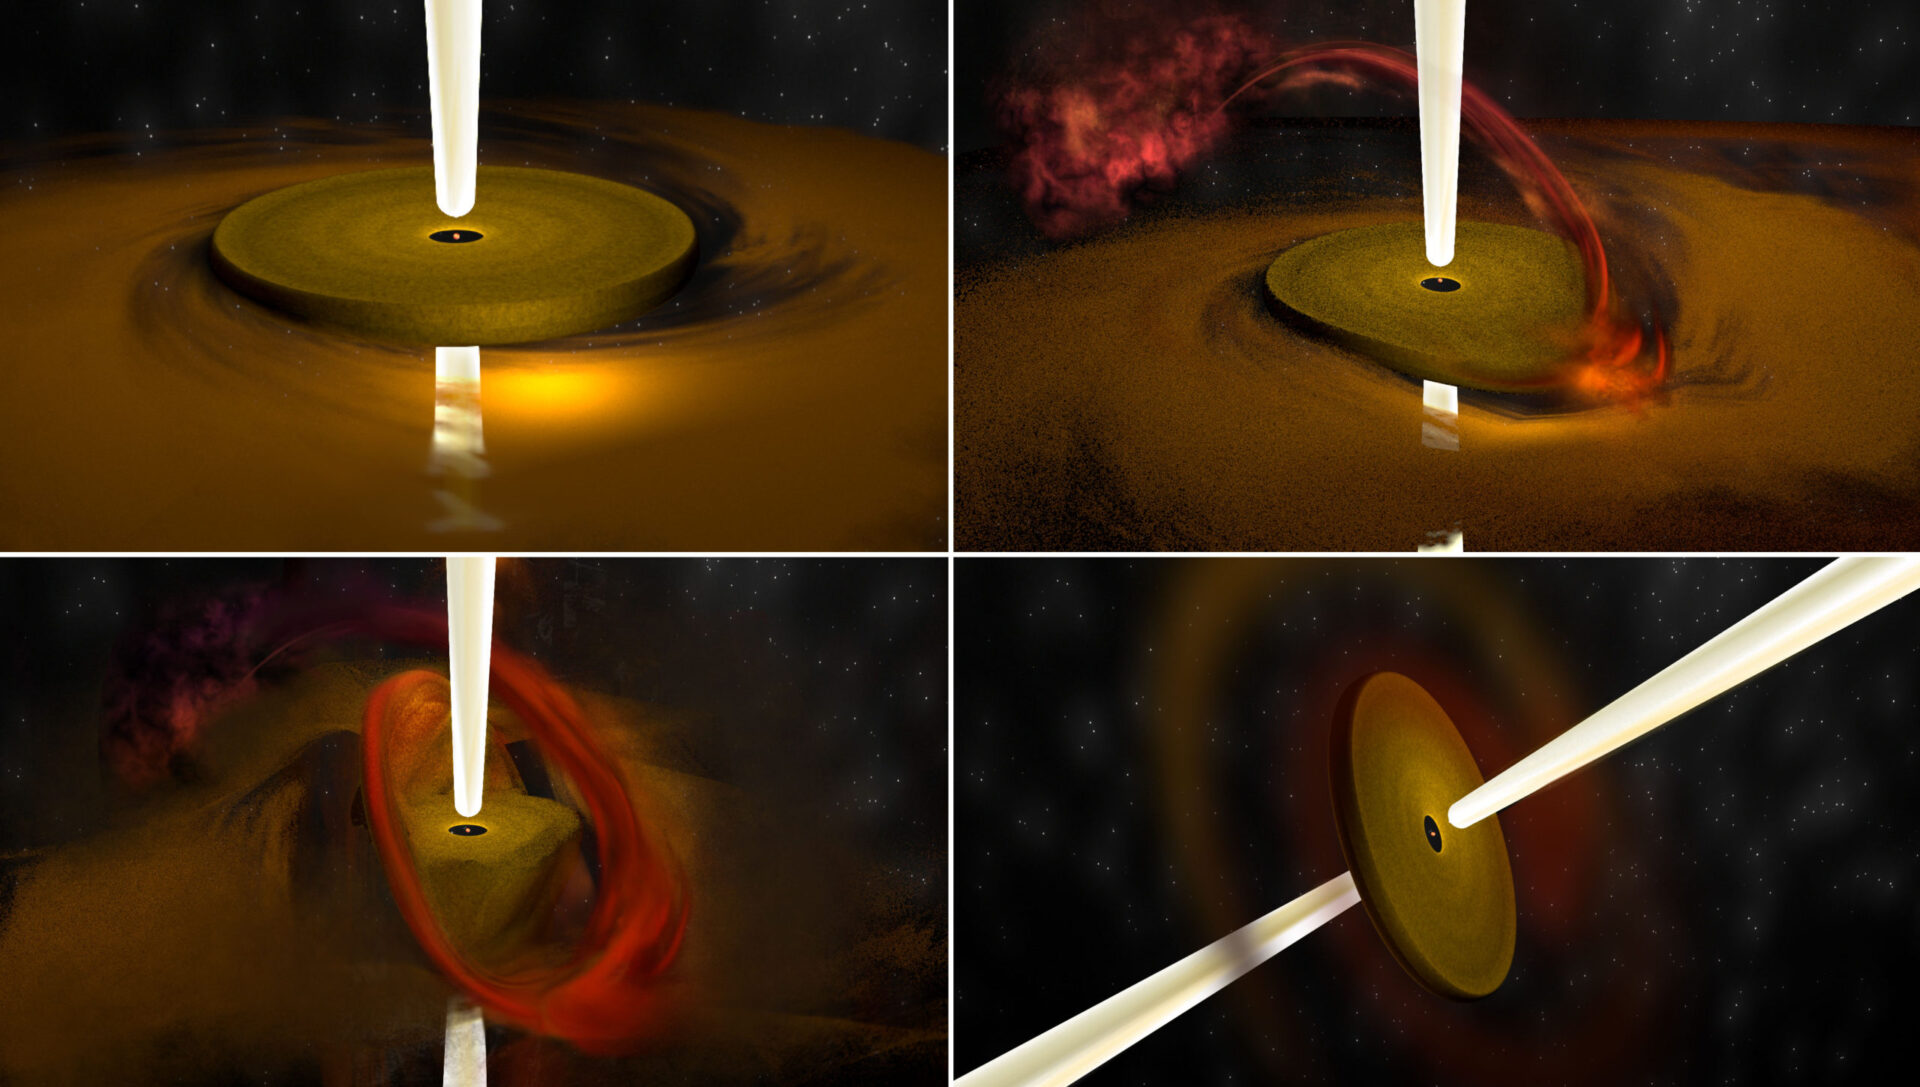 <p>Artist’s conception illustrates process seen in forming stars much more massive than the Sun. At top left, material is being drawn into the young star through an orbiting disk which generates a fast-moving jet of material outward. At top right, material begins coming in from another direction, and at bottom left, begins deforming the original disk until, at bottom right, the disk orientation — and the jet orientation — have changed. Credit: Bill Saxton, NRAO/AUI/NSF</p>
